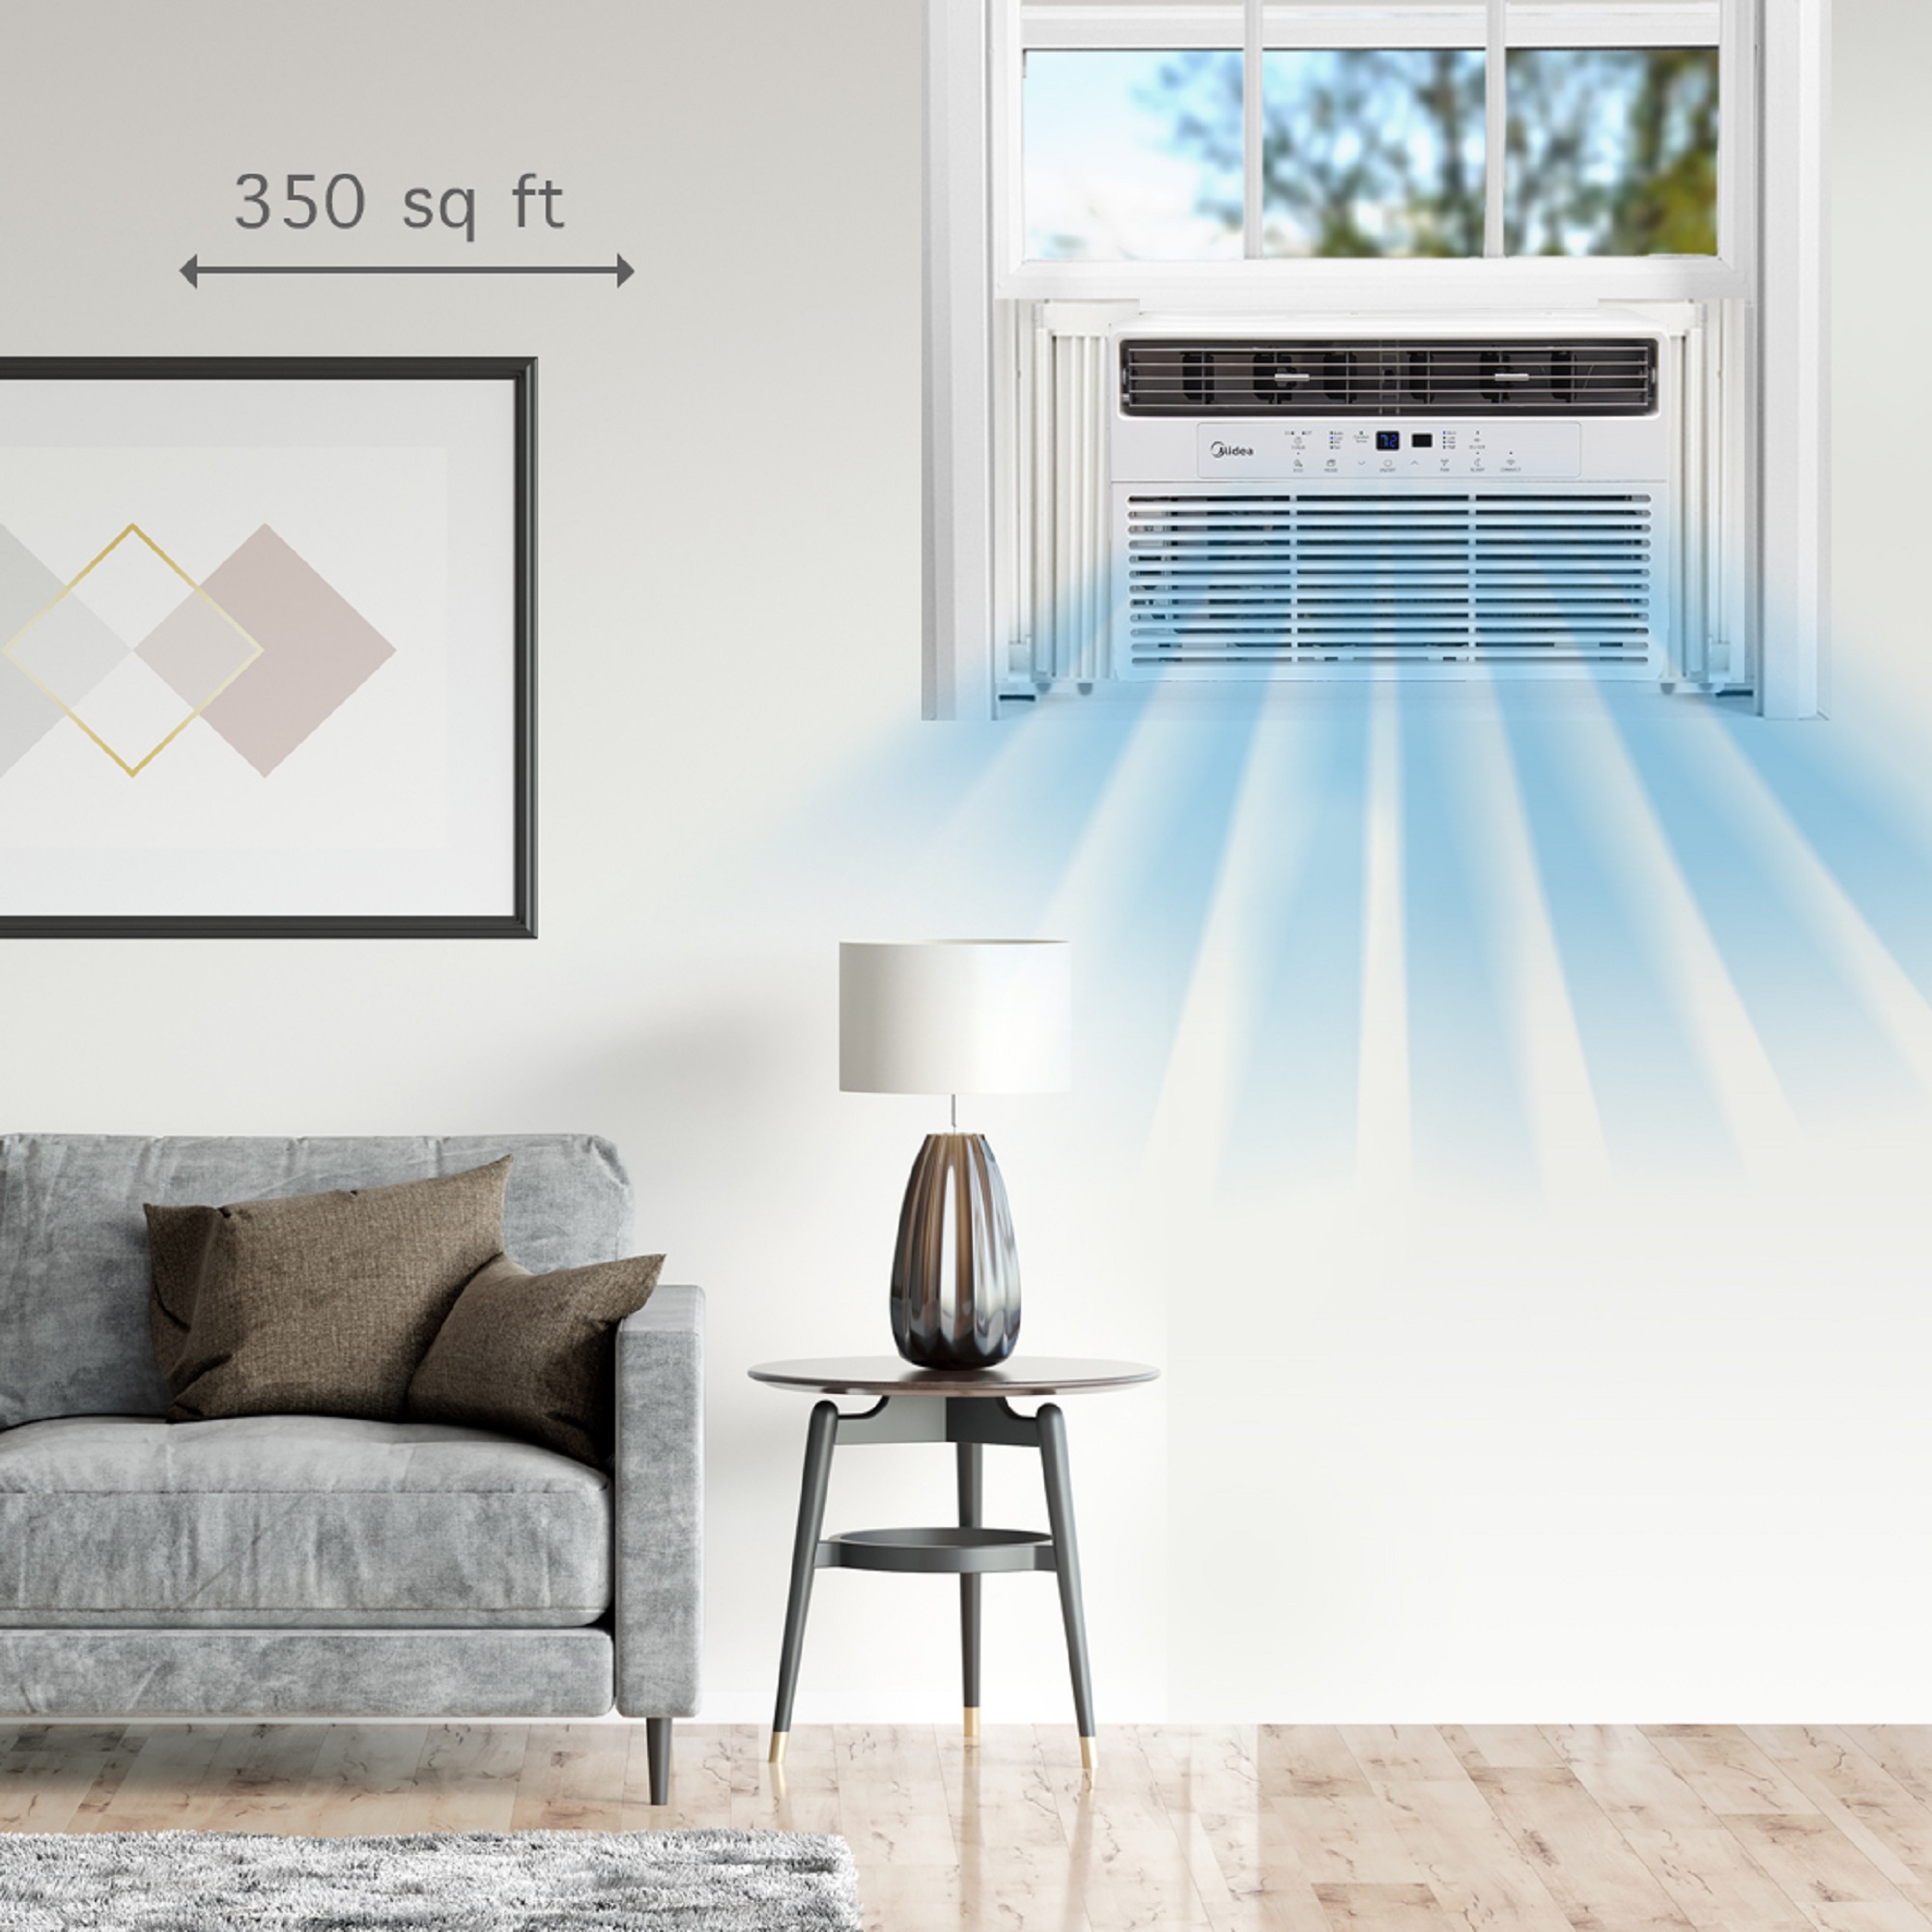 Midea 8,000 BTU 115V Smart Window Air Conditioner with Comfort Sense Remote, Covers up to 350 Sq. ft., White, MAW08S1WWT - image 5 of 22